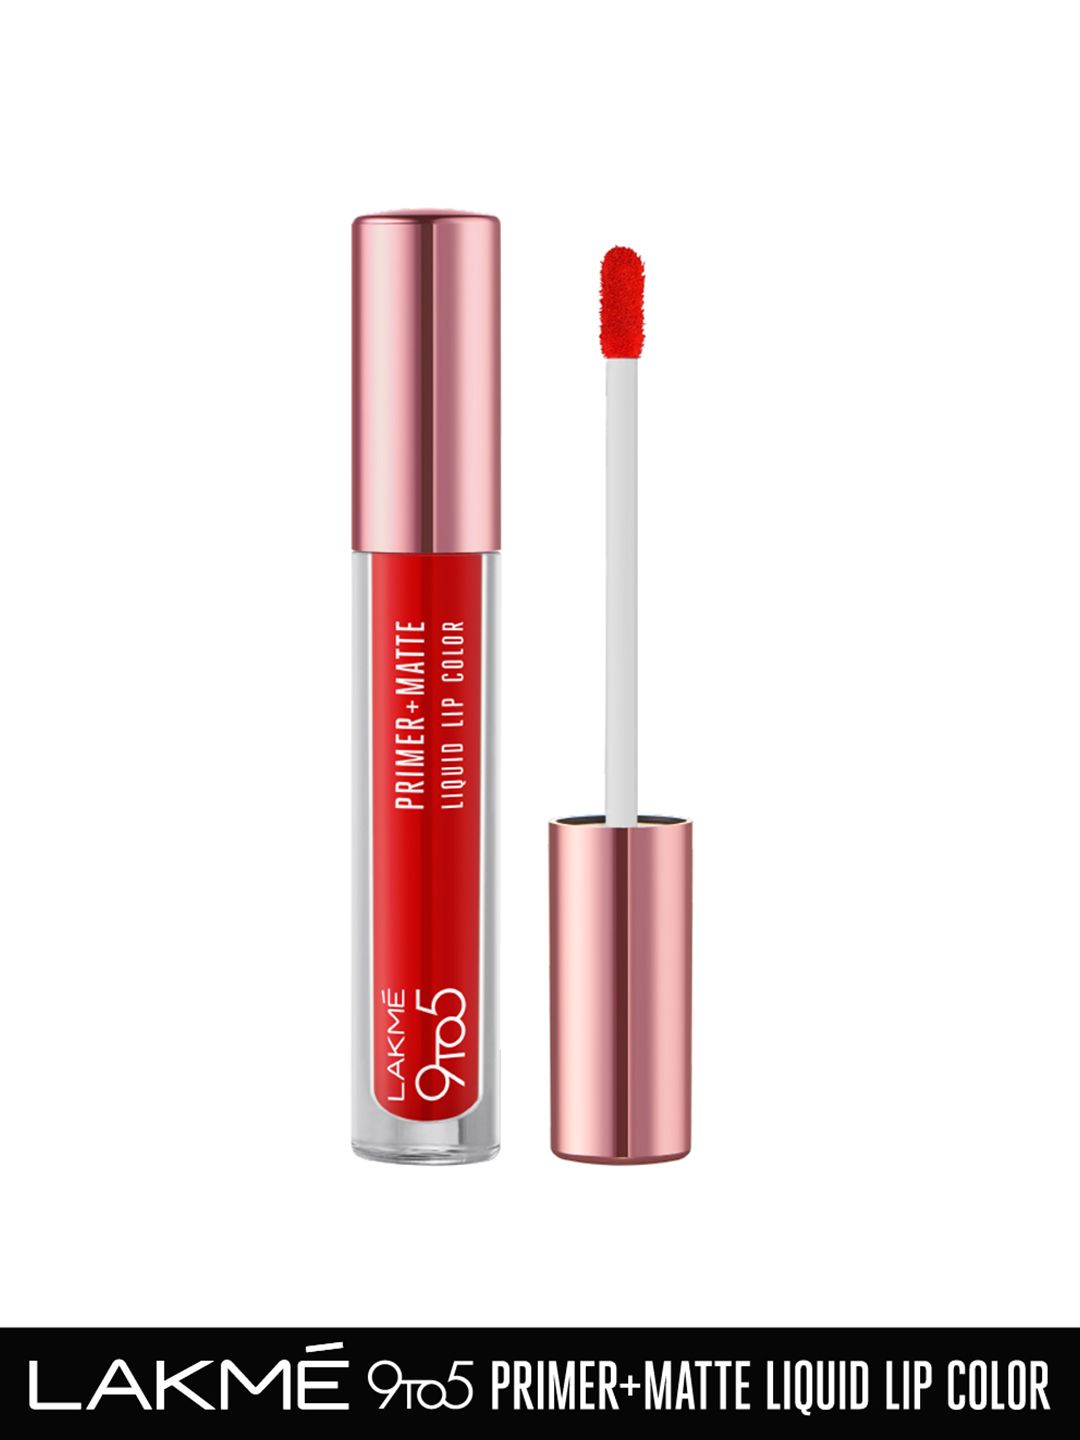 Lakme 9to5 Primer + Matte Liquid Lip Color 4.2 ml - Fiery Scarlet MR1 Price in India